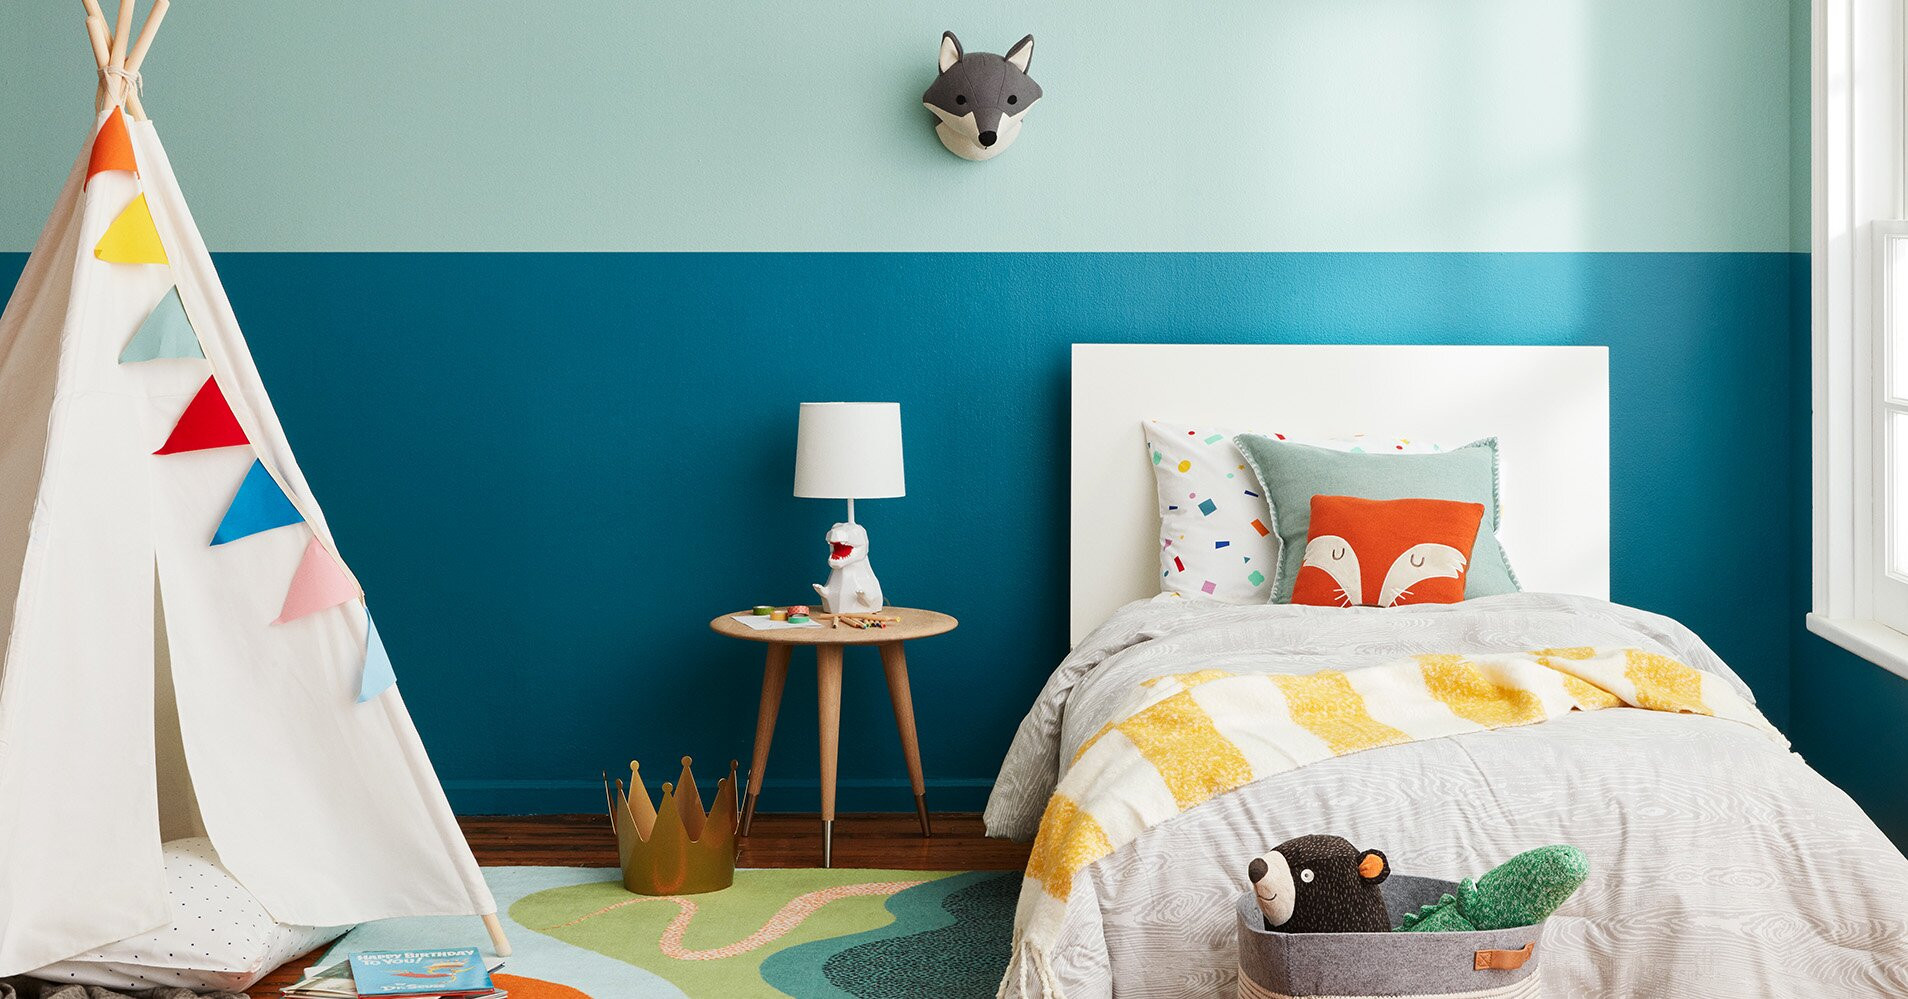 Kids Room Paint
 How to Choose a Youthful Paint Color for Your Child s Room